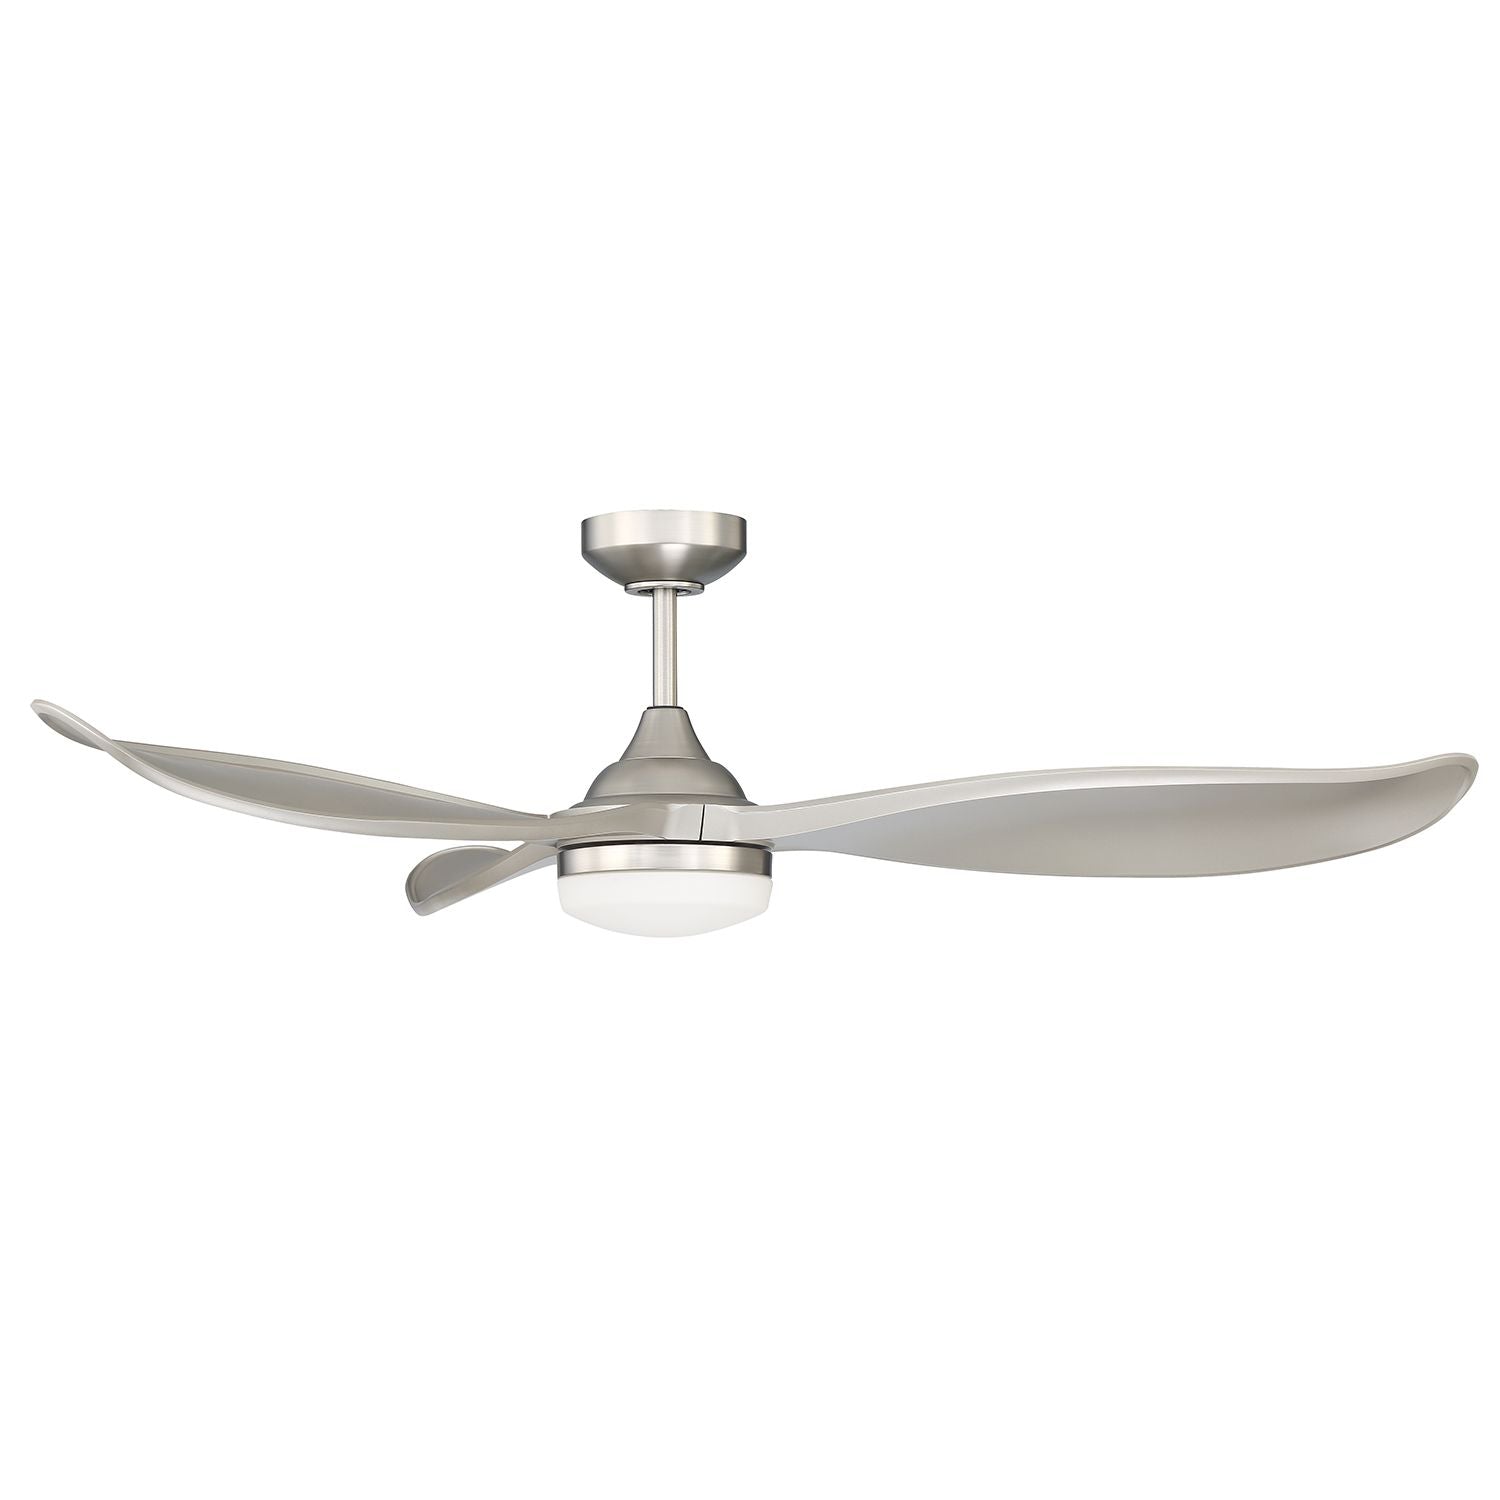 Triax Ceiling Fan Satin Nickel with matching blades